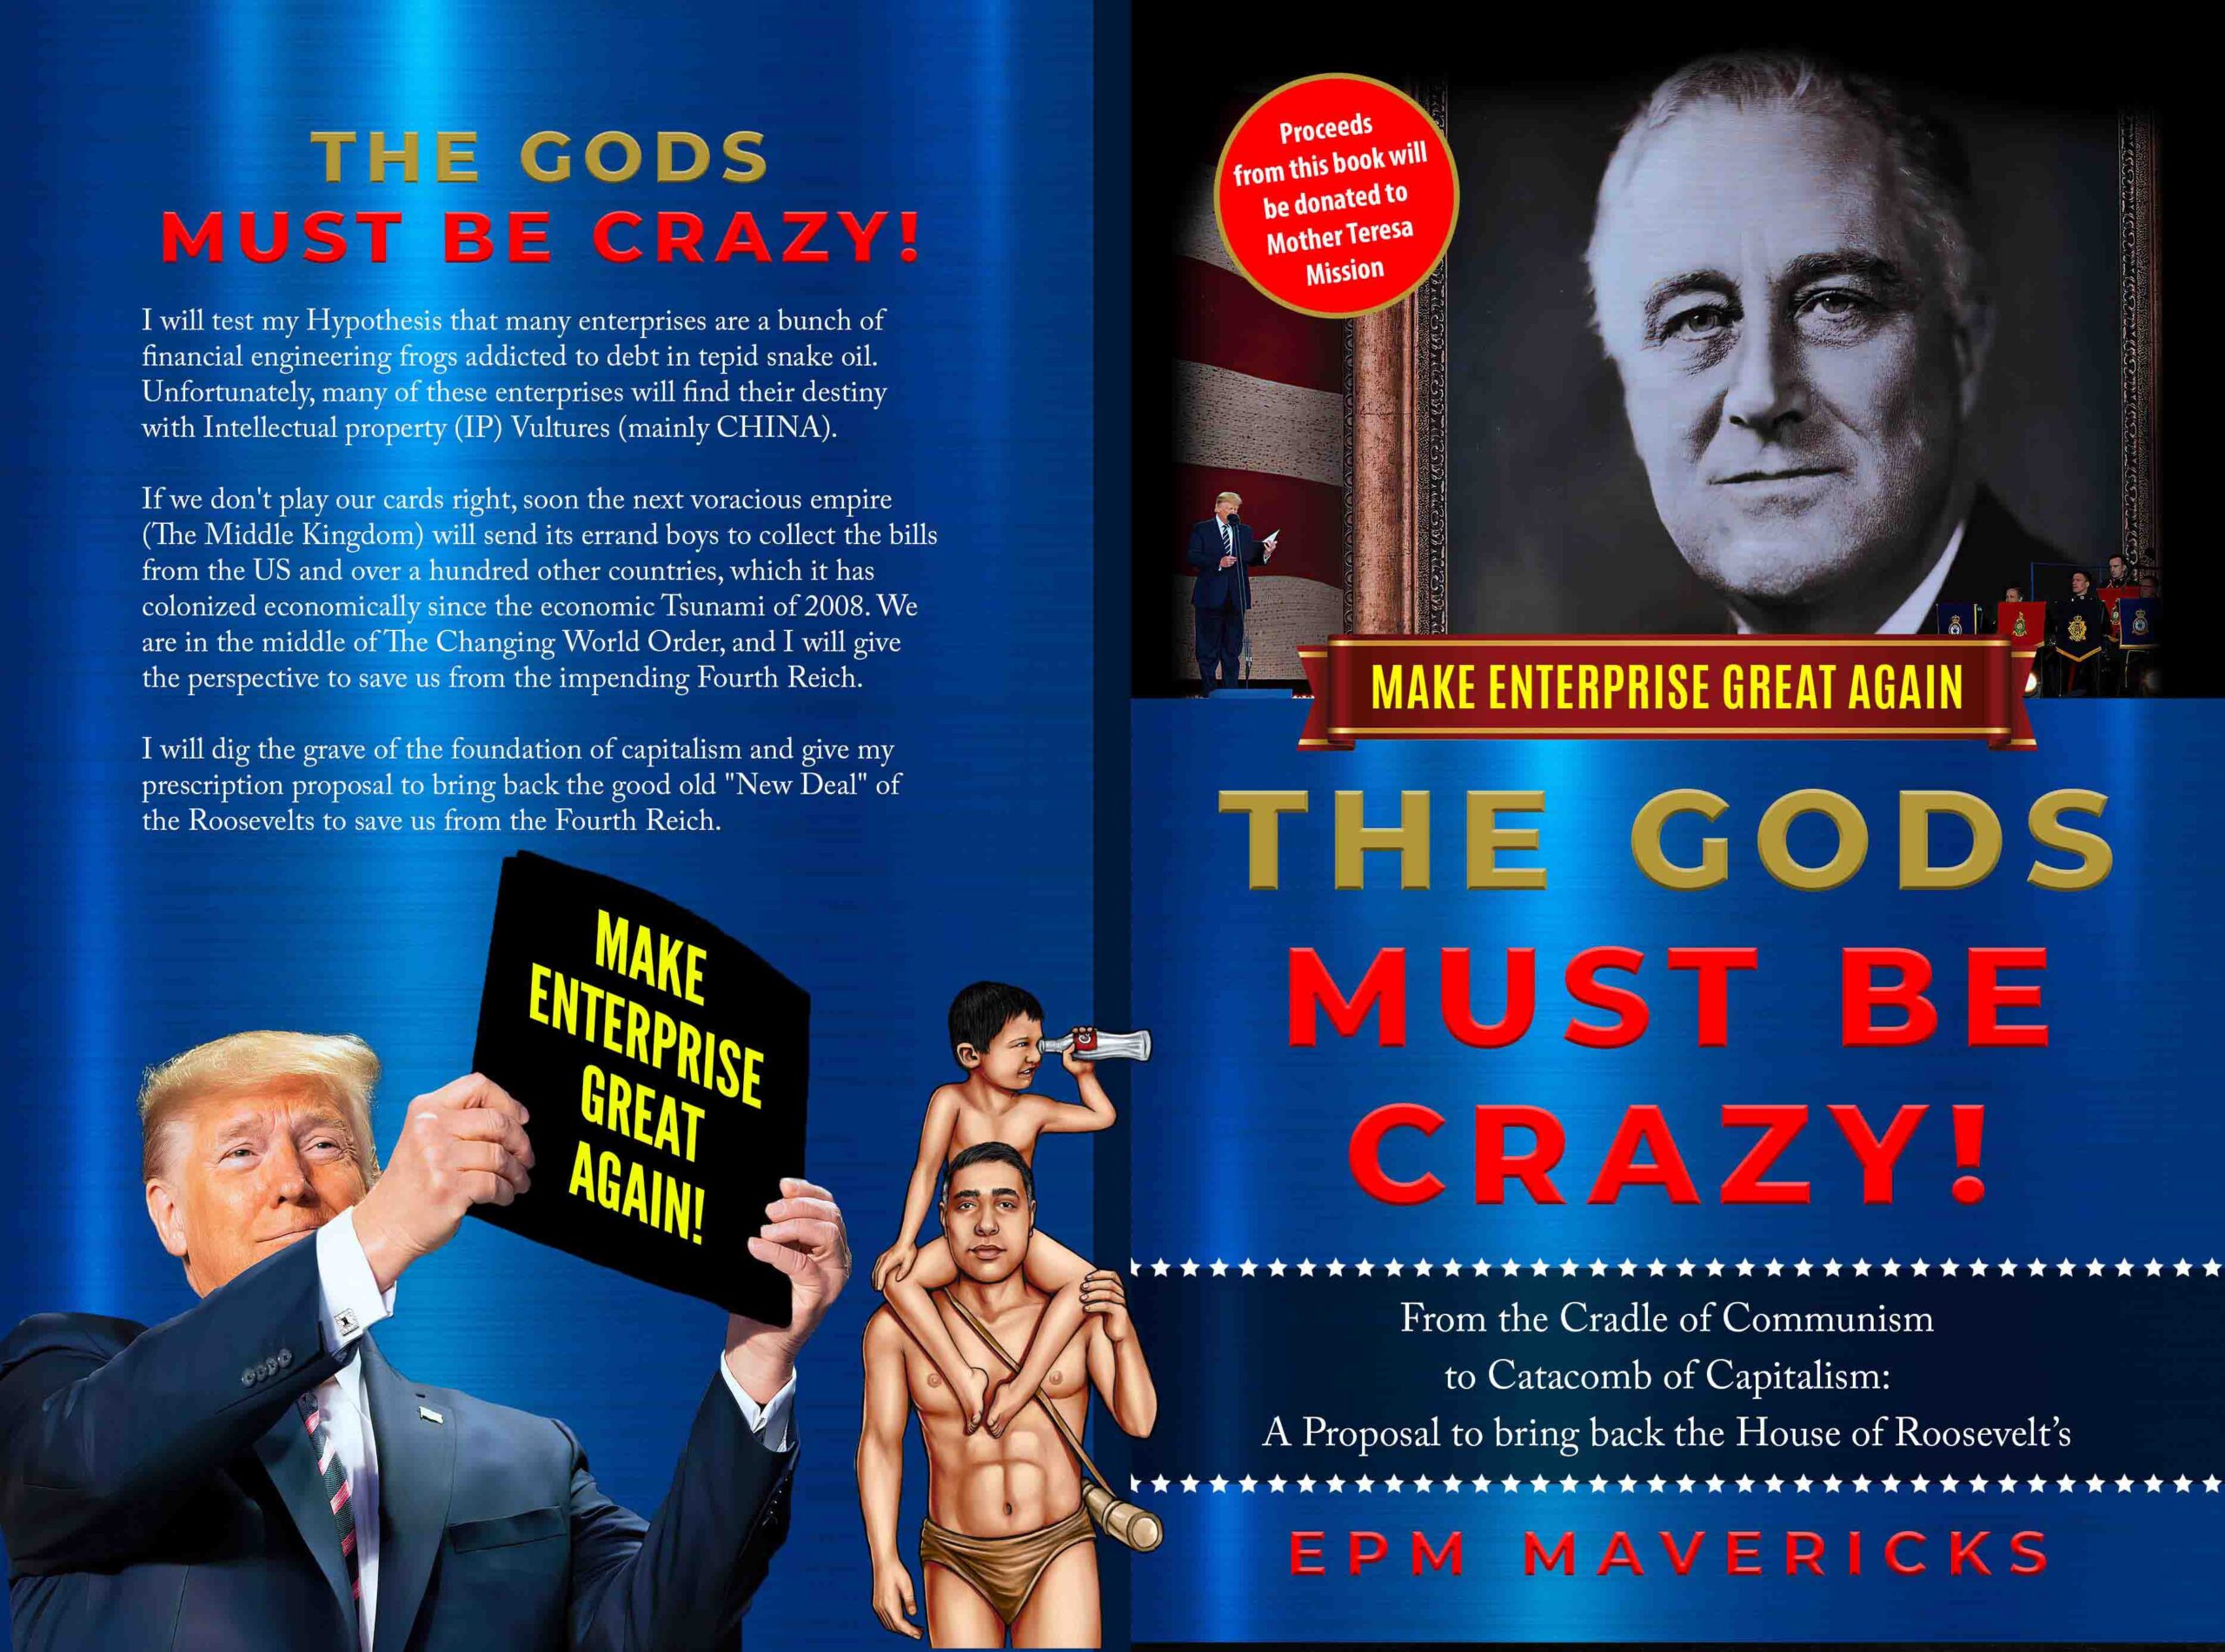 Make Enterprise Great Again: The Gods Must Be Crazy!: Cradle of Communism to Catacomb of Capitalism: A Proposal to bring back the House of Roosevelt’s by EPM Mavericks